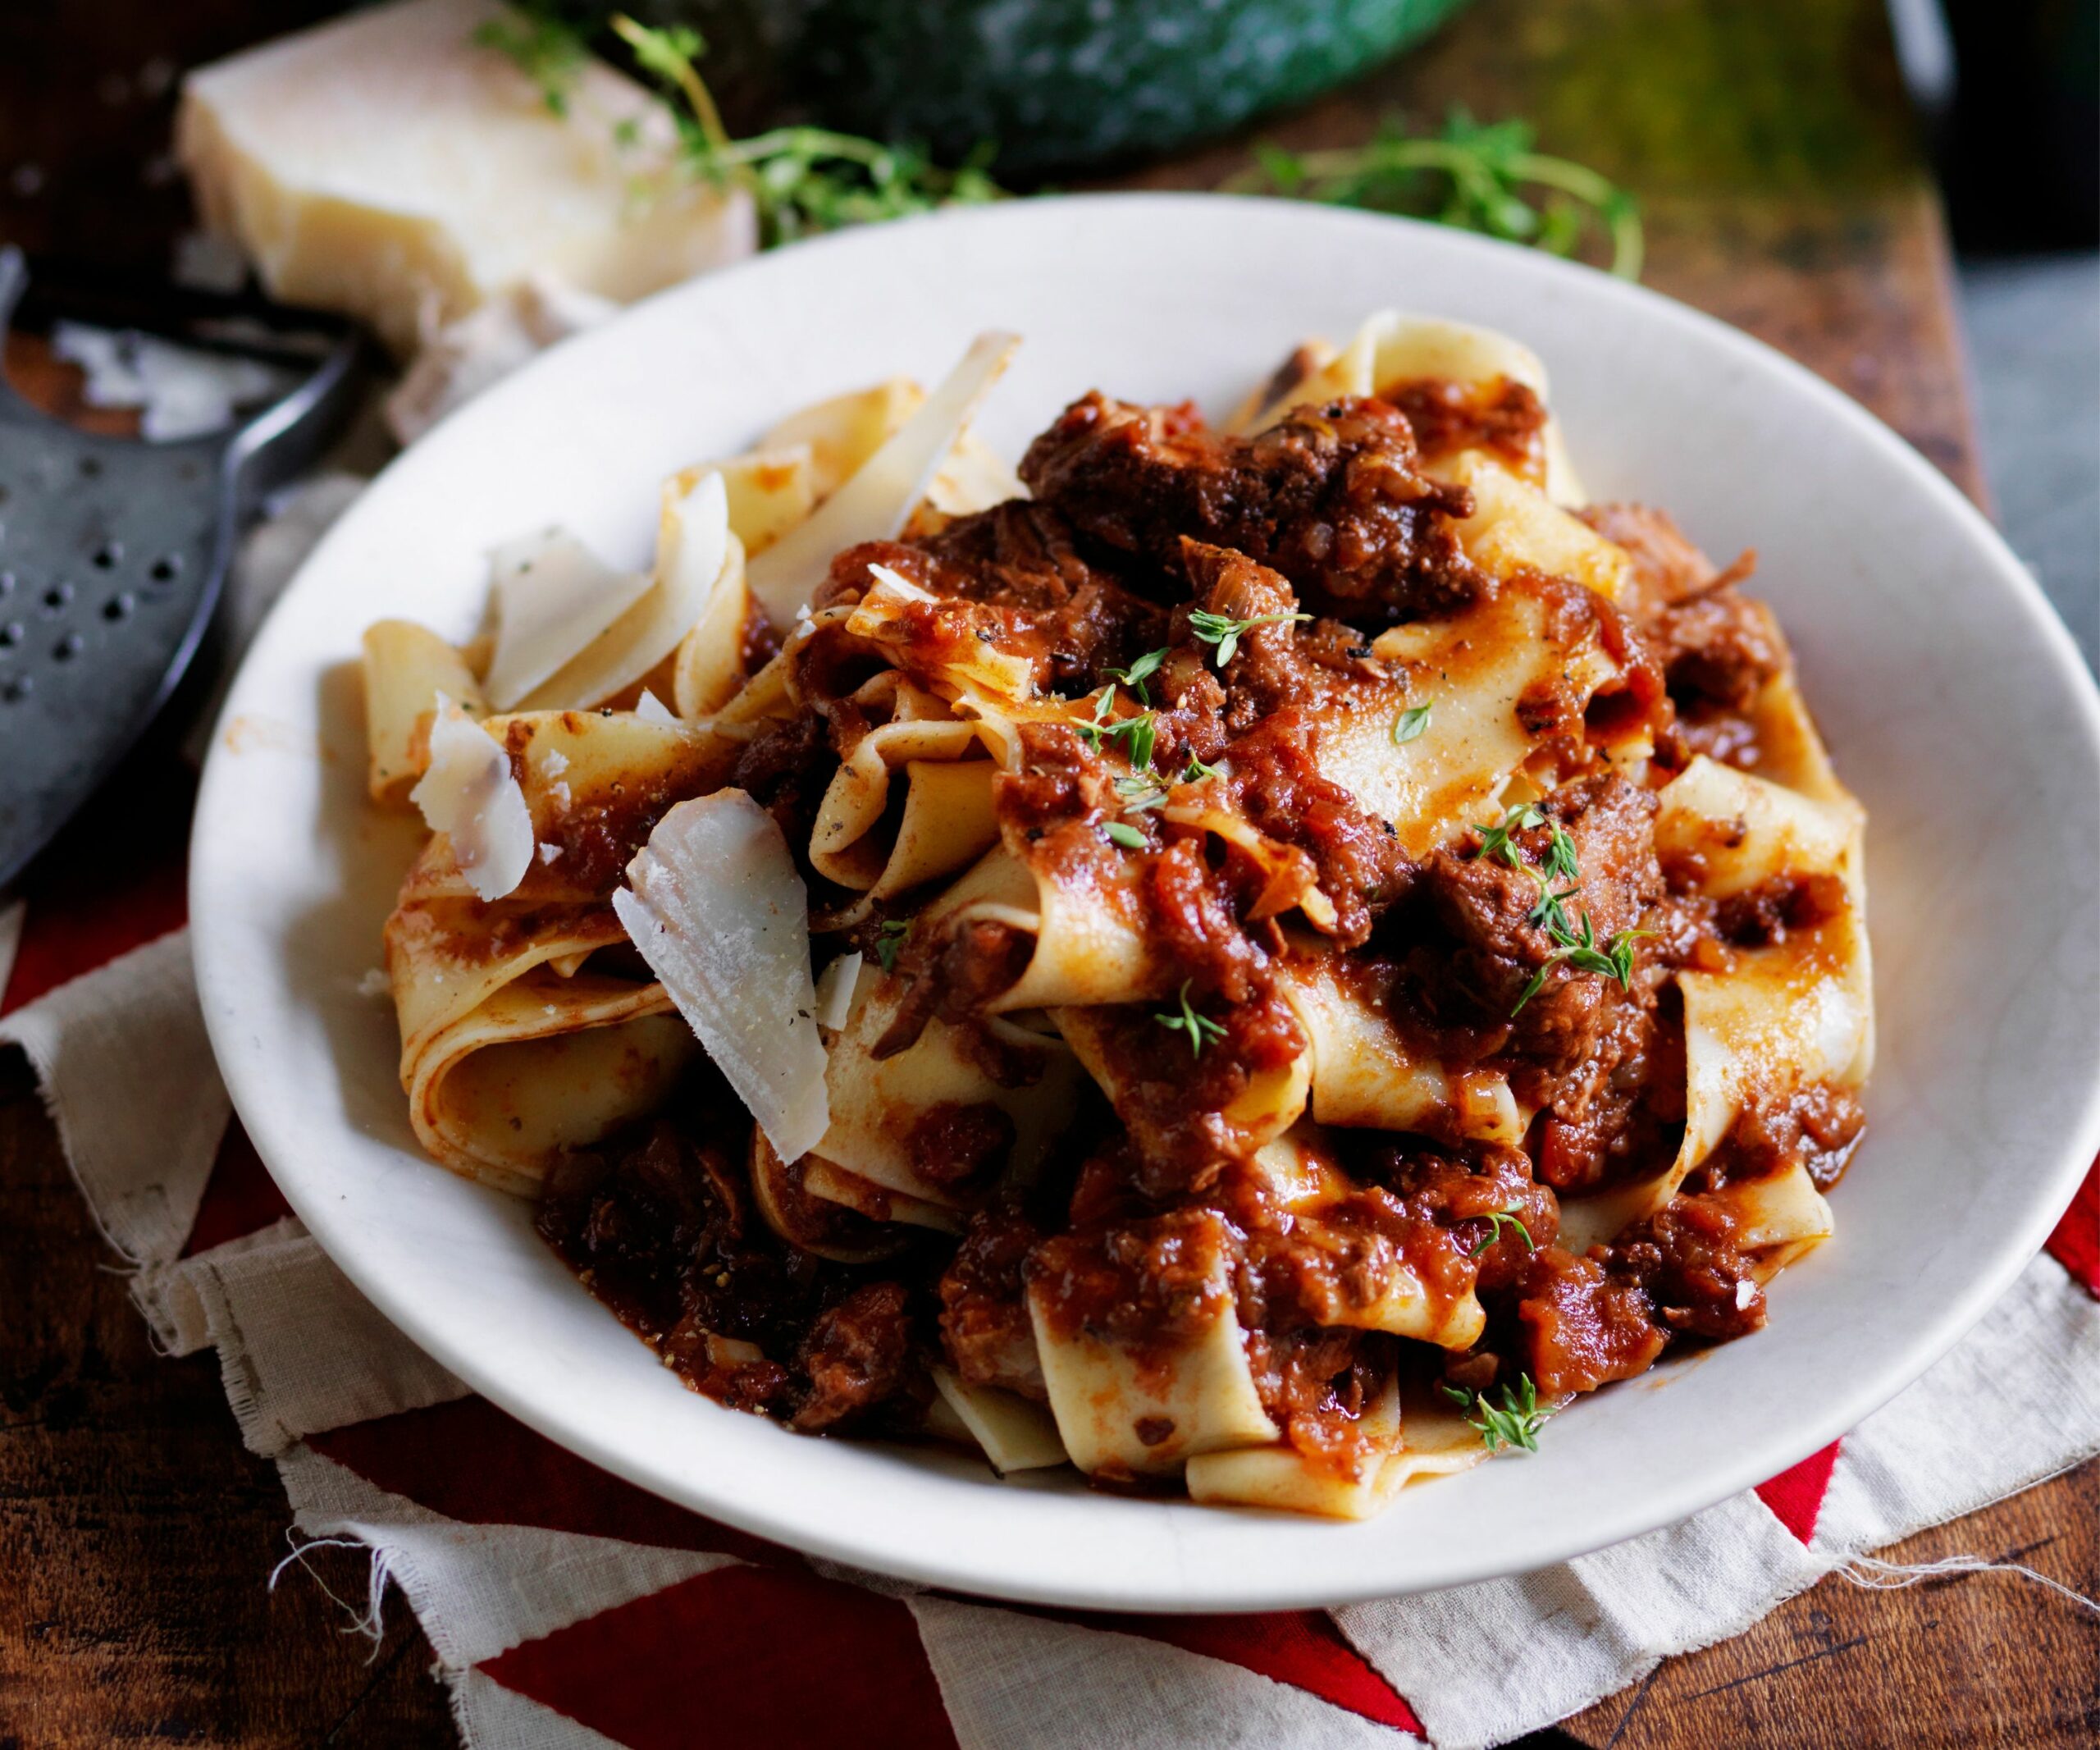 Slow-cooked beef ragu with pappardelle